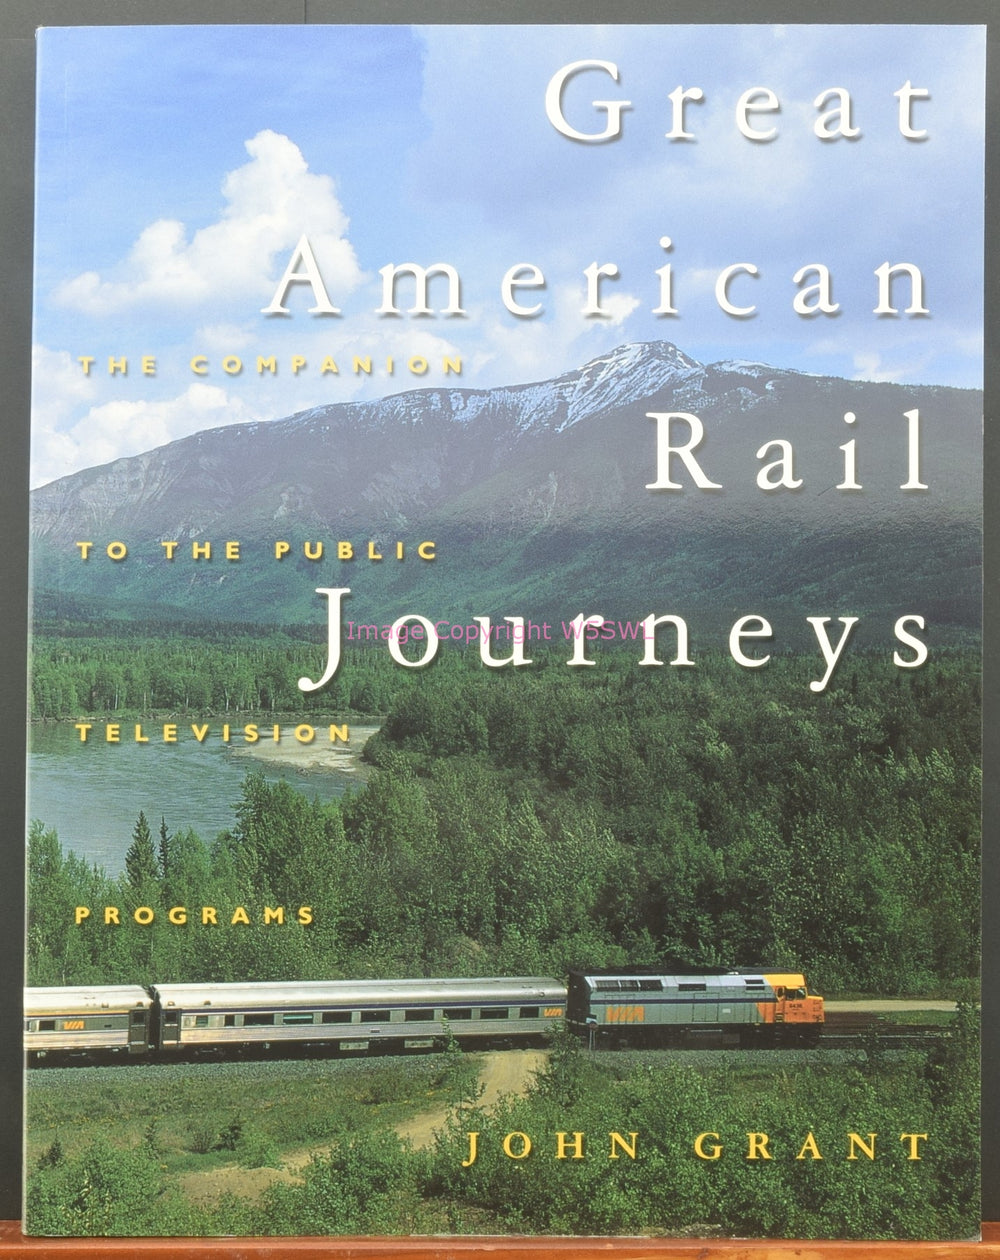 Great American Rail Journeys - The Companion to the Public Television Programs - Dave's Hobby Shop by W5SWL